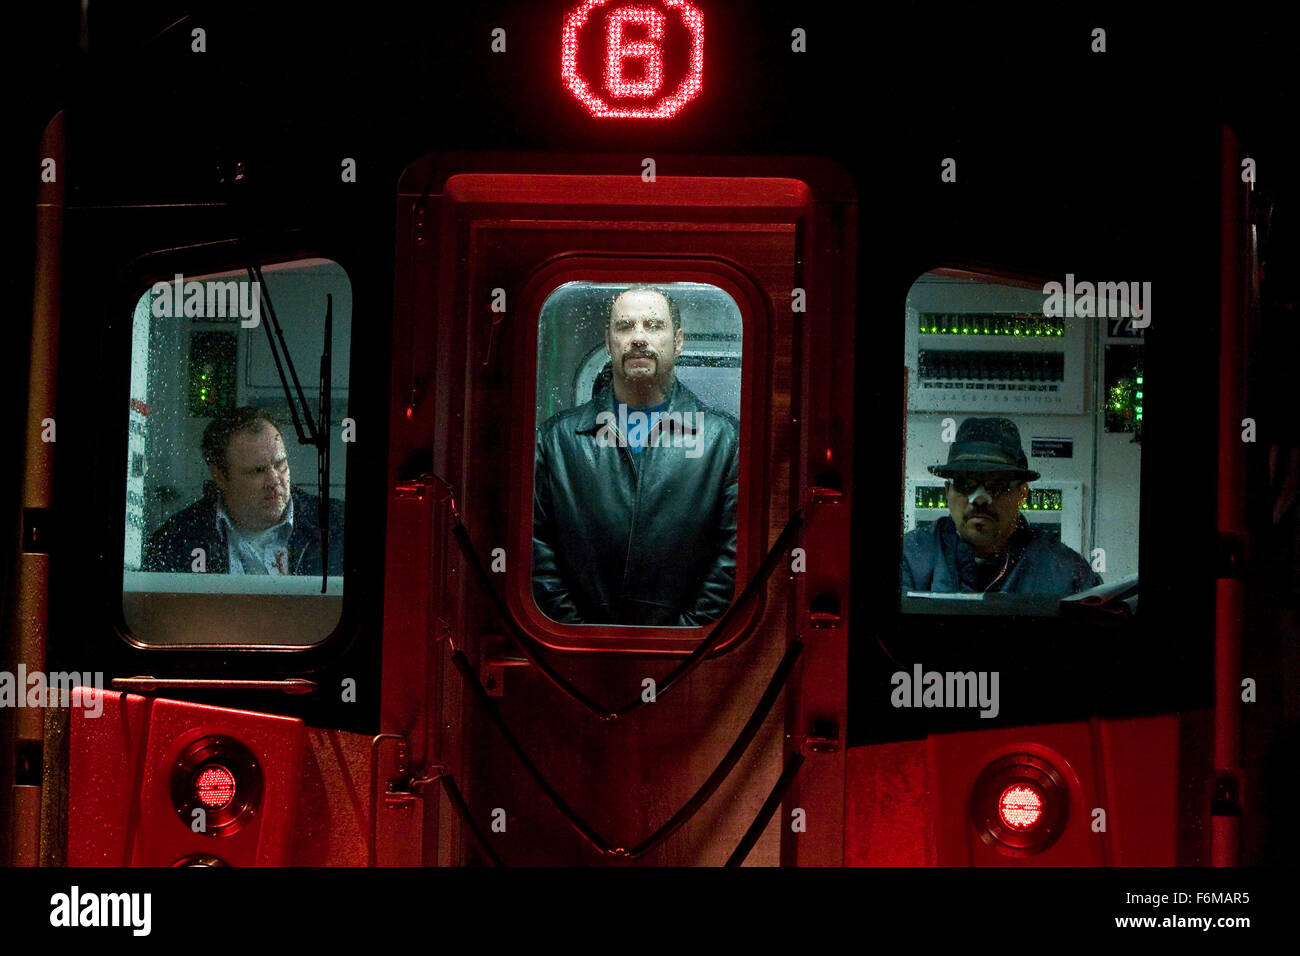 RELEASE DATE: June 12, 2009. MOVIE TITLE: The Taking of Pelham 1 2 3. STUDIO: Metro-Goldwyn-Mayer (MGM). PLOT: Armed men hijack a New York City subway train, holding the passengers hostage in return for a ransom, and turning an ordinary day's work for dispatcher Walter Garber into a face-off with the mastermind behind the crime. PICTURED: JOHN TRAVOLTA as Ryder. Stock Photo